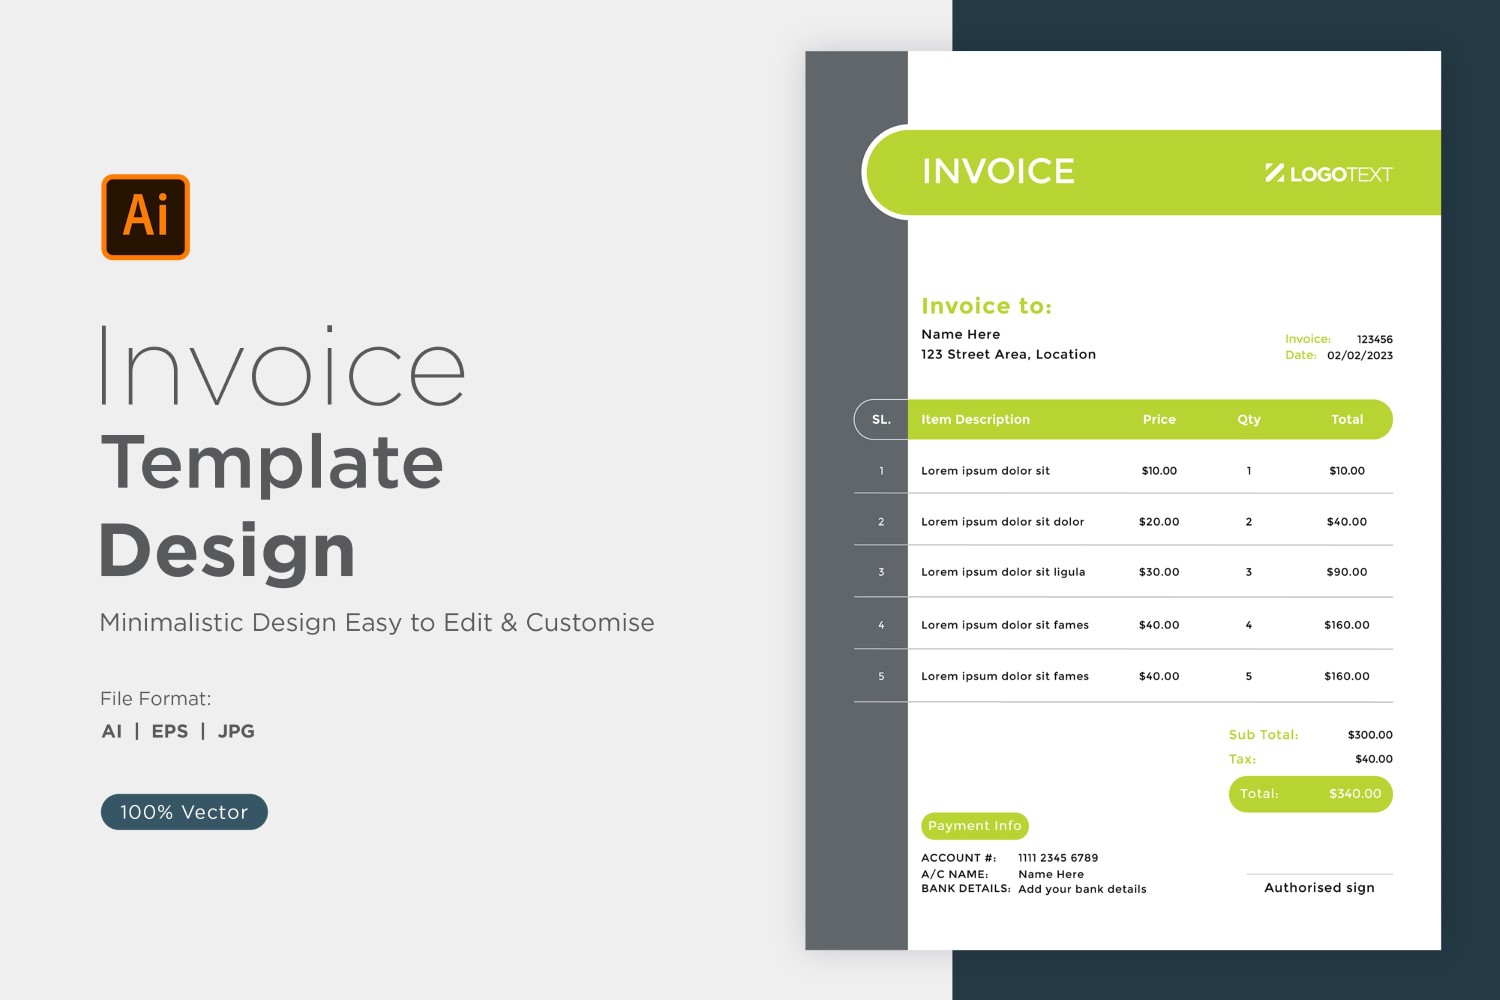 Corporate Invoice Design Template Bill form Business Payments Details Design Template 87